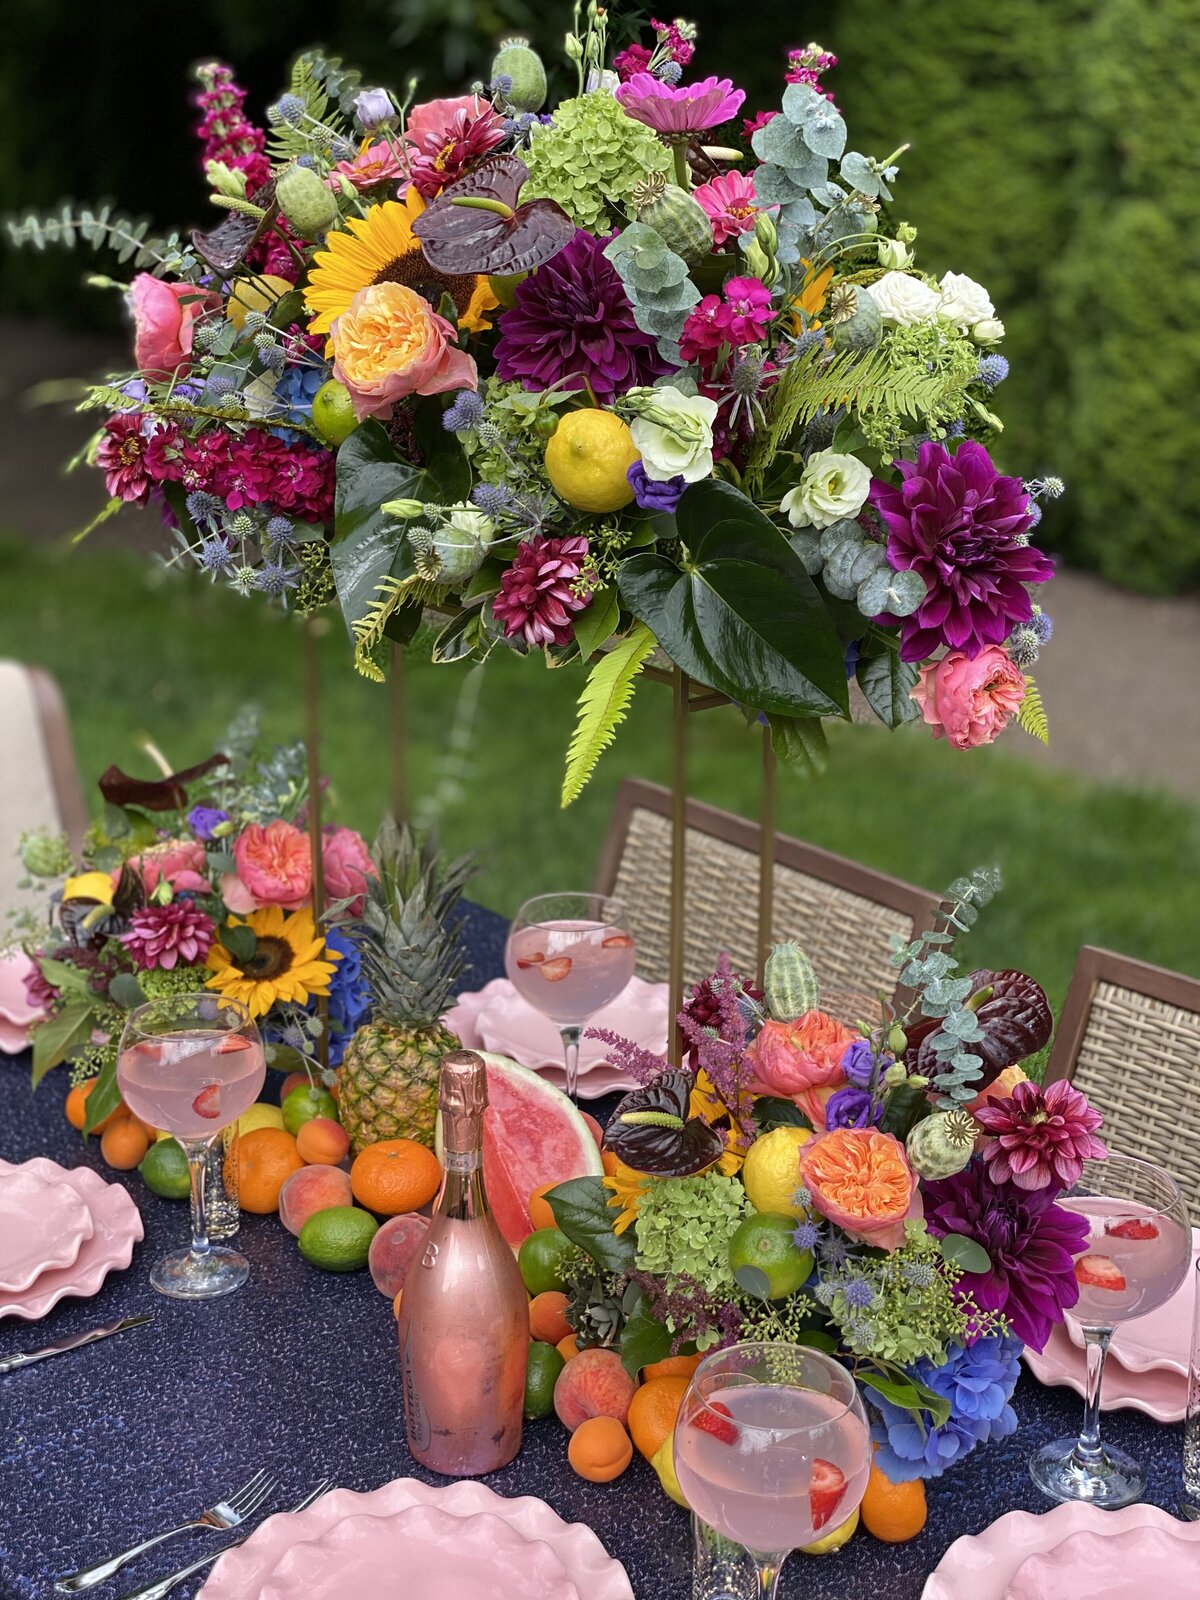 BKC4U WEDDING FLOWERS TROPICAL ELEVATED CENTERPIECE AND LOW COMPOTES